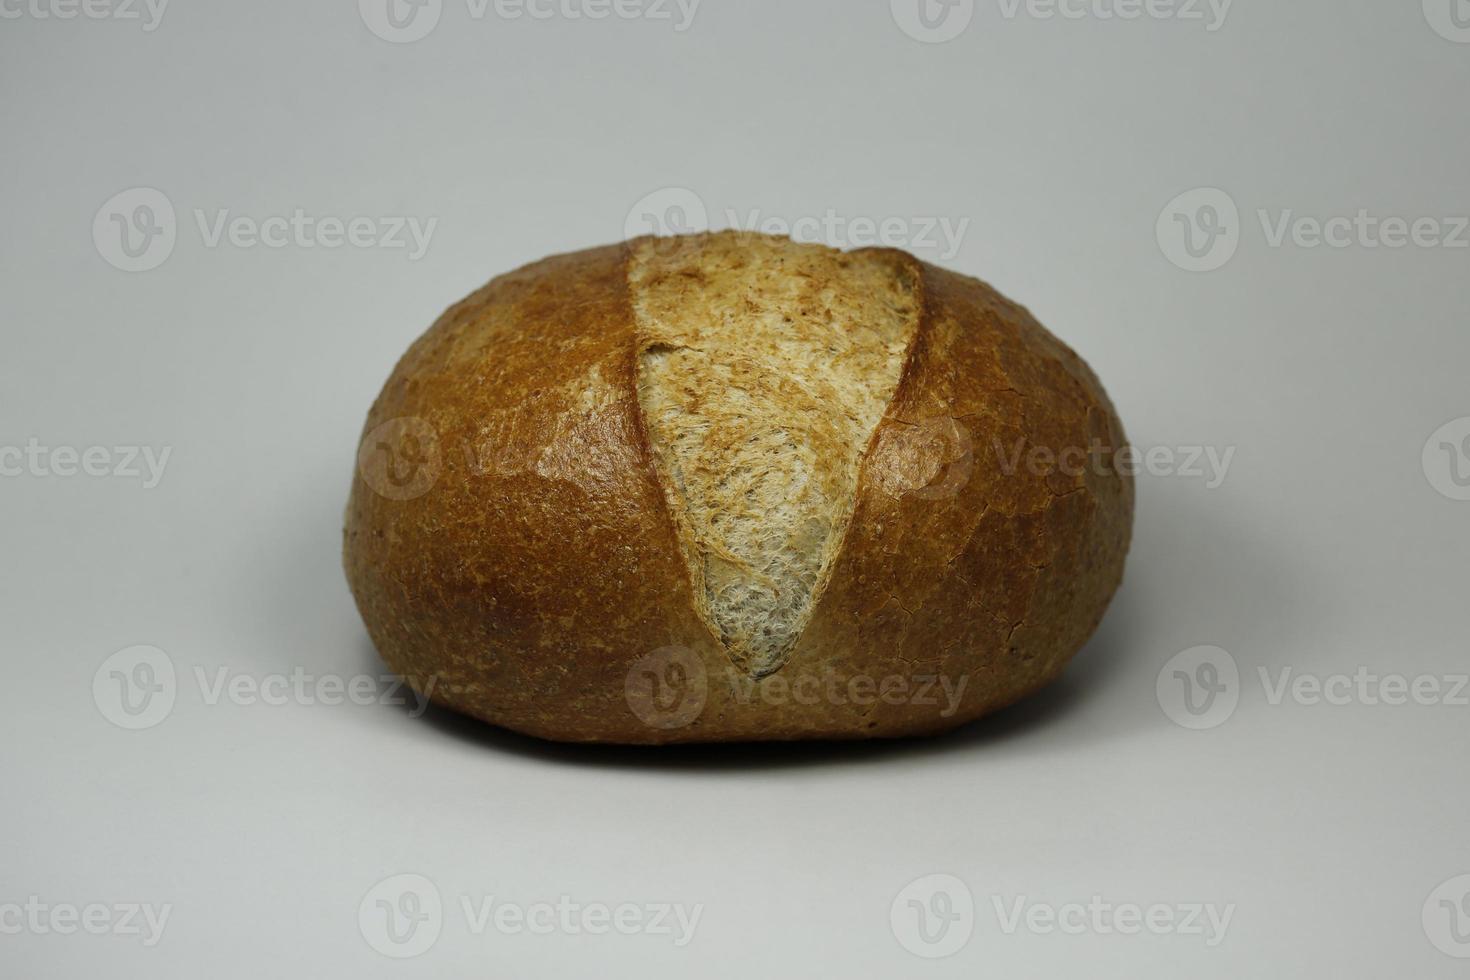 Trabzon Bread, Bakery Products, Pastry and Bakery photo